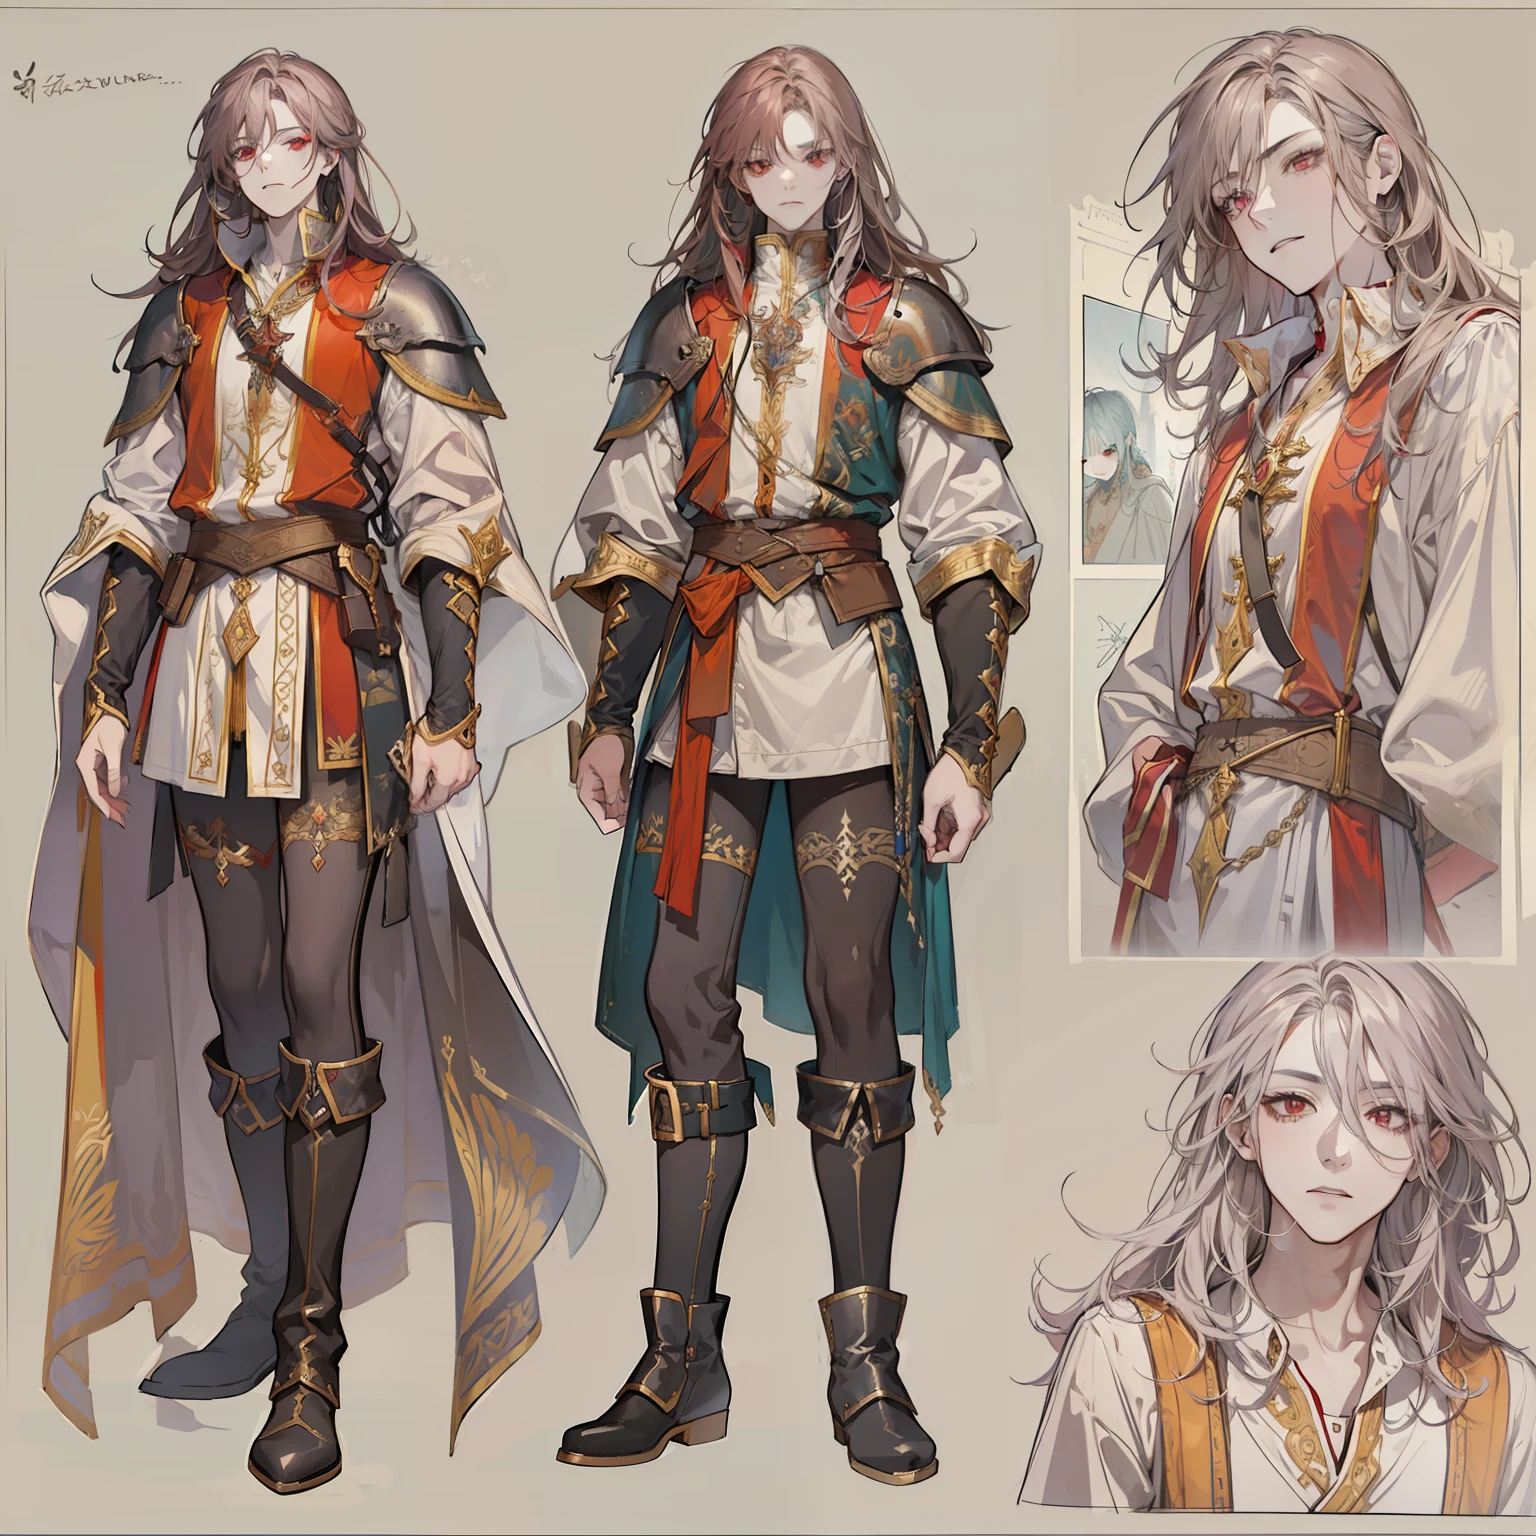 1 boy, solo, long hair, red eyes, shirt, high boots, Lightweight clothing, medieval theme, looking at viewer, fantasy art, beautiful painting, guwaika style, epic exquisite character art, stunning characters, man, lean (reference sheet:1.5)